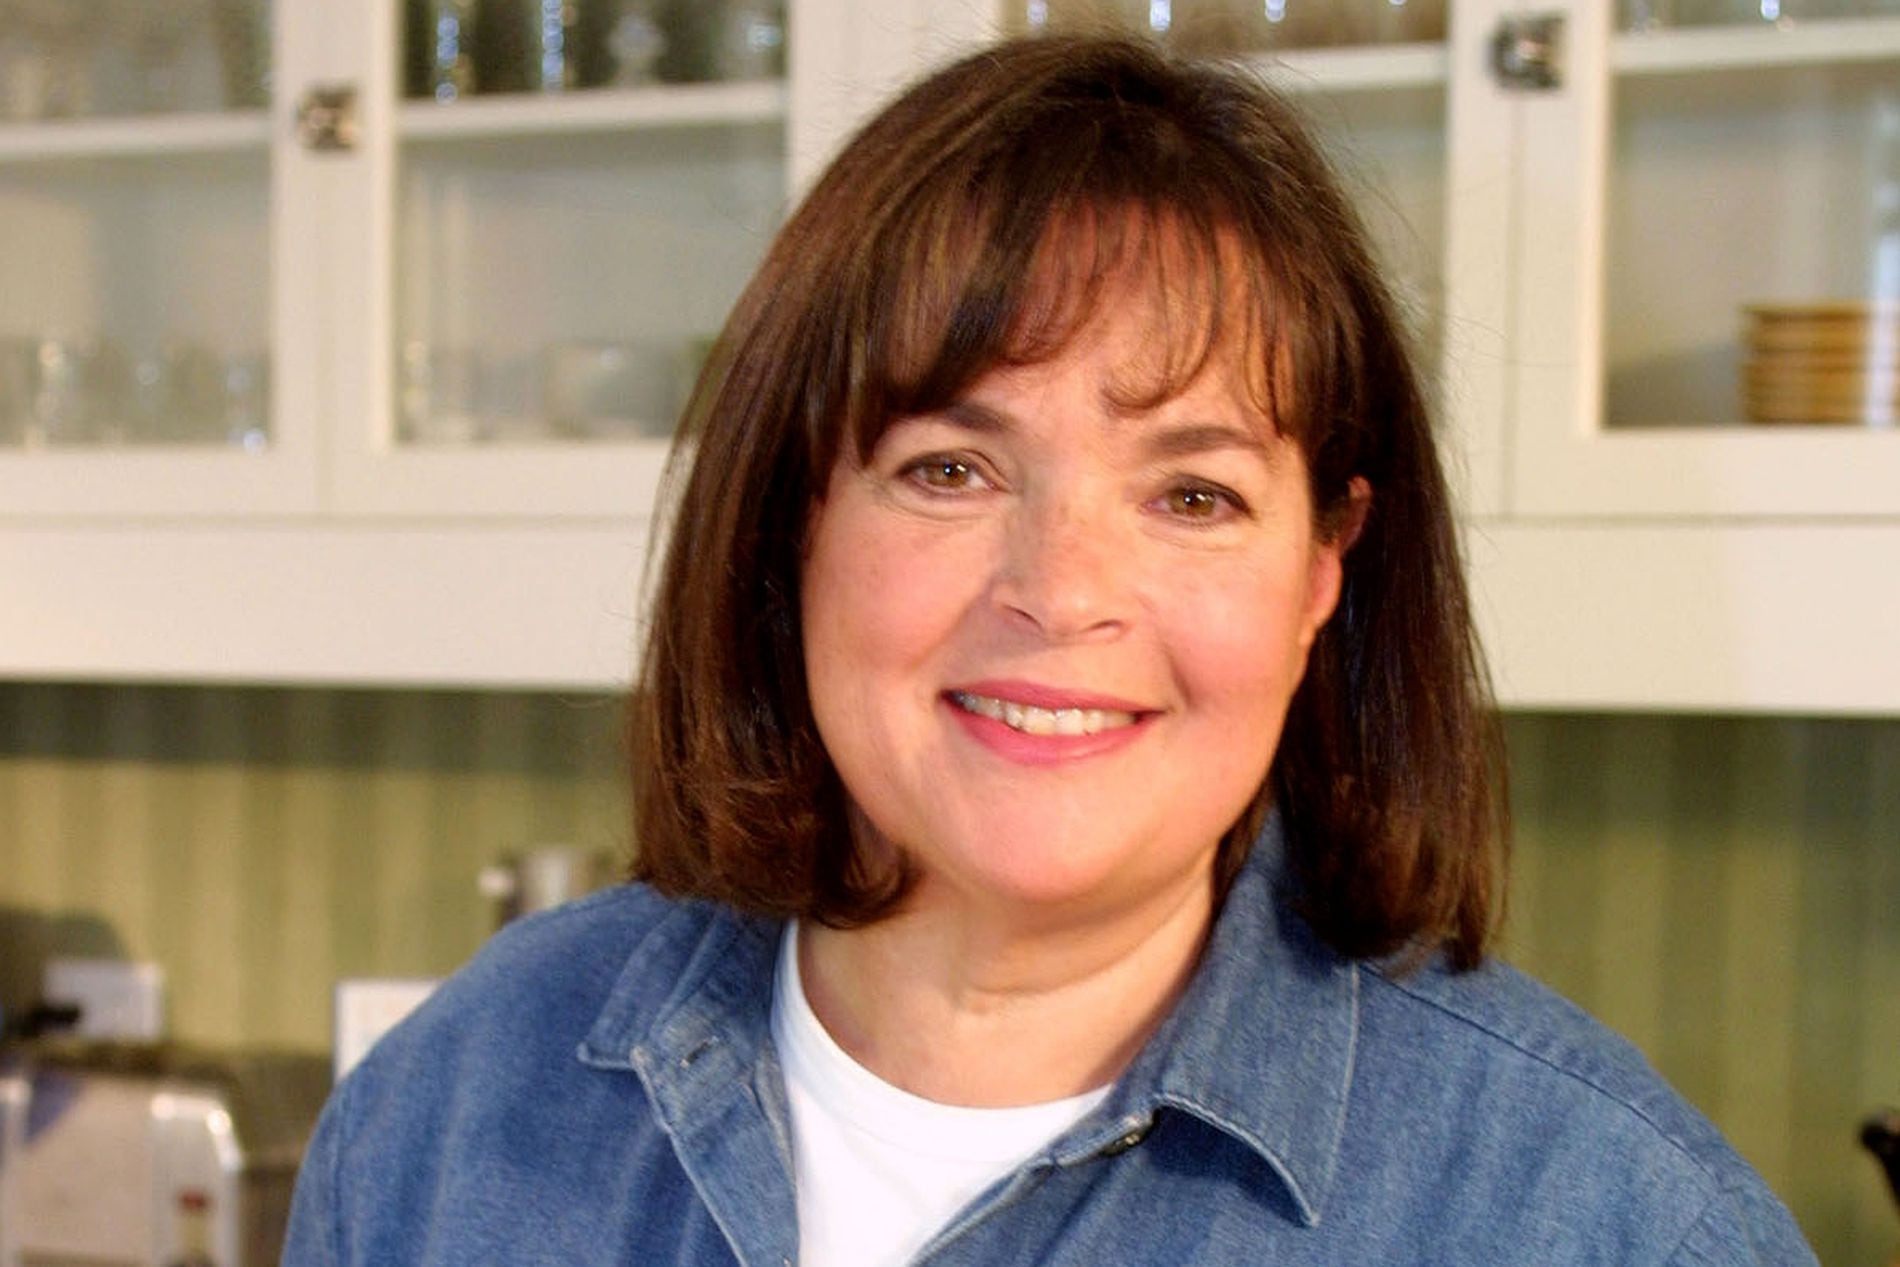 Ina Garten wants to help you cook like a pro - The Globe and Mail